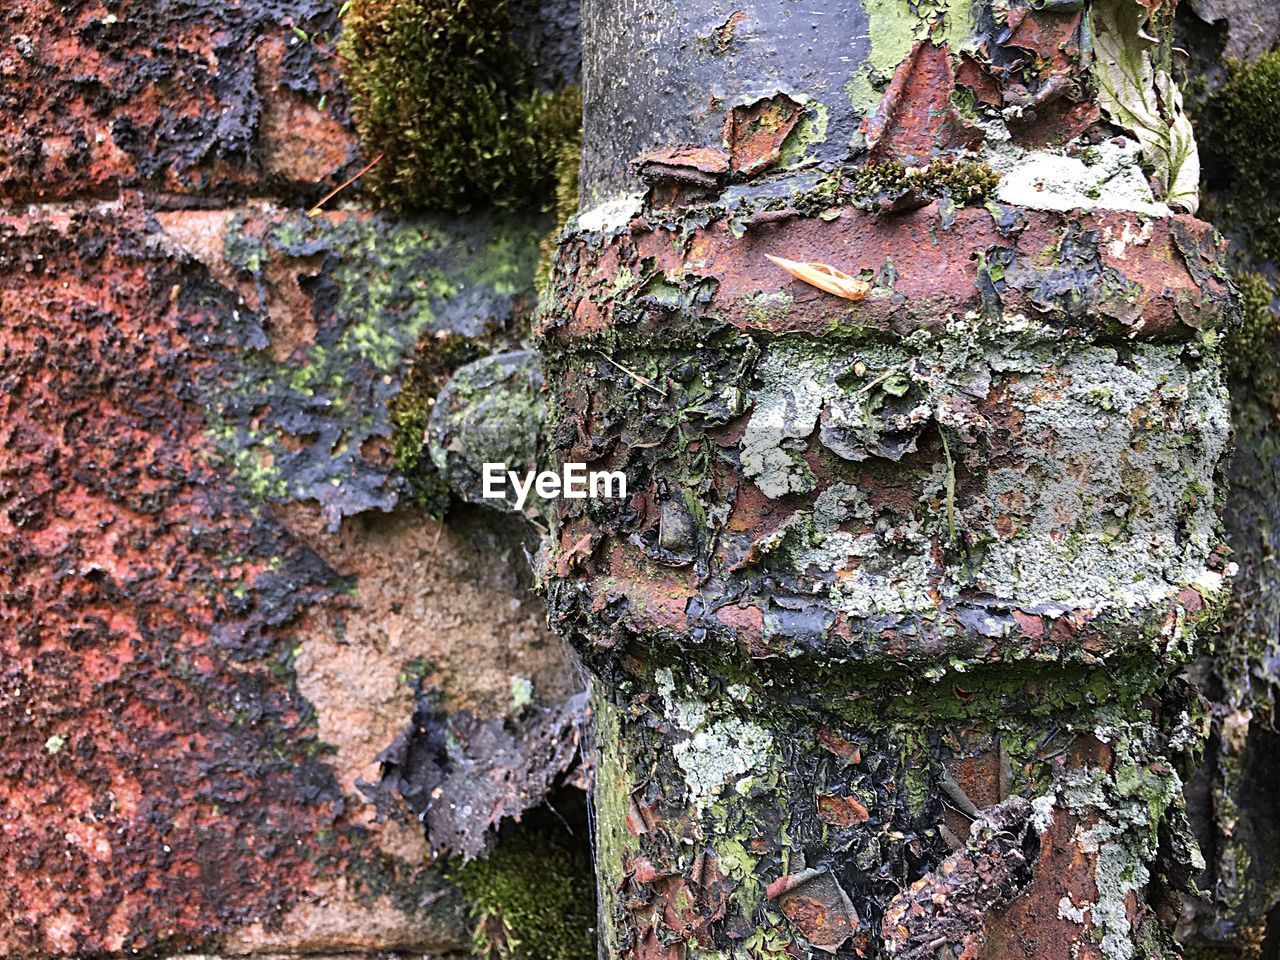 CLOSE-UP OF LICHEN GROWING ON TREE TRUNK